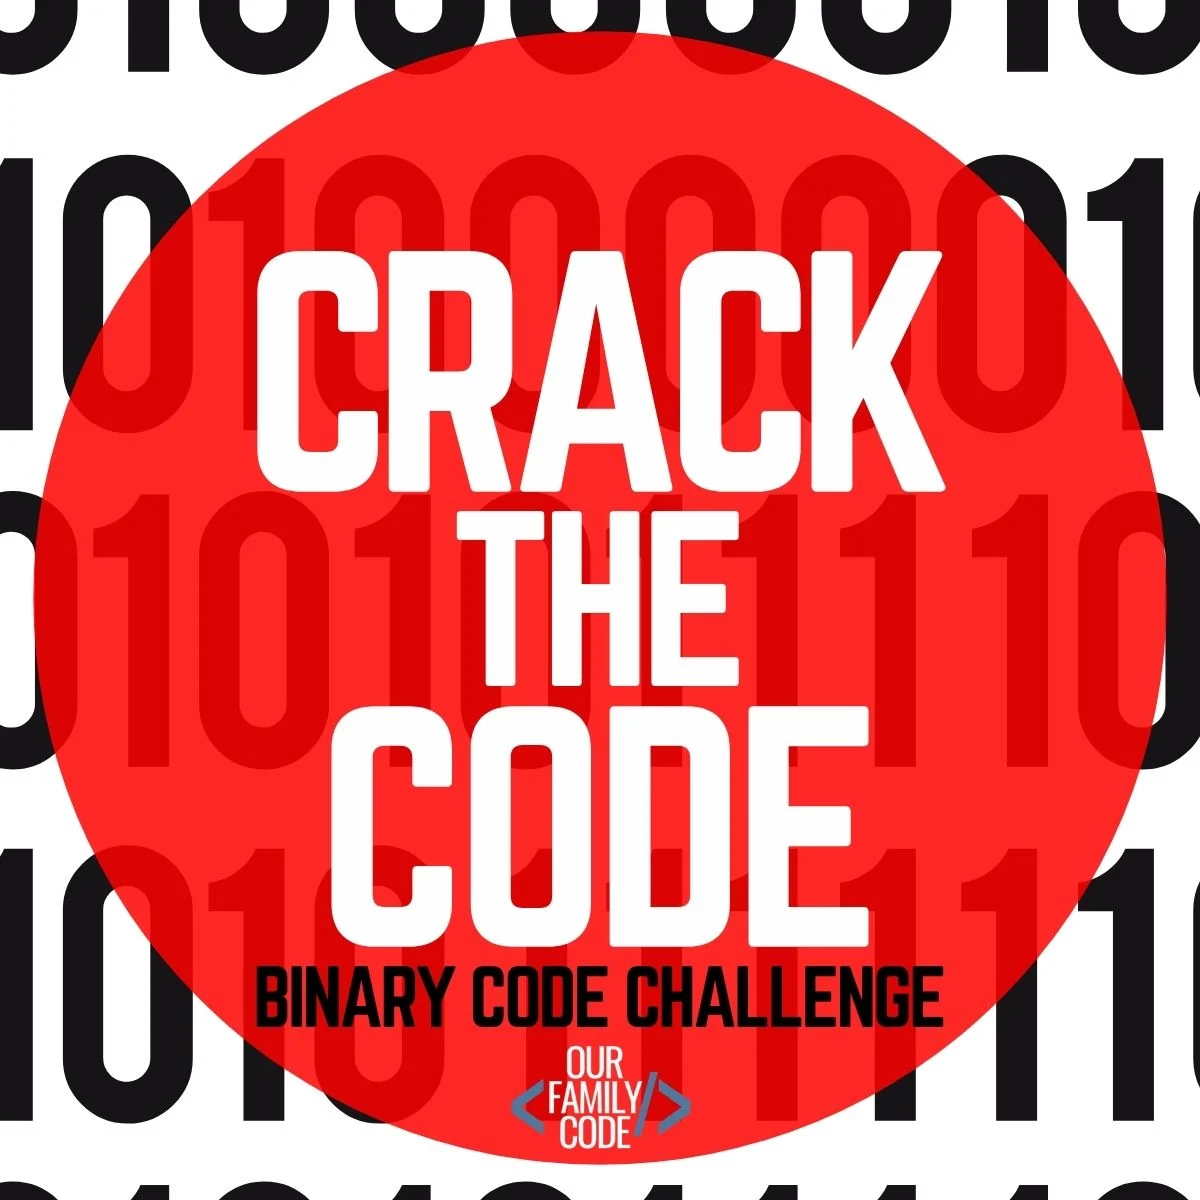 Check out this easy way to teach your kids binary code and grab some awesome free binary code printable activities! #binarycode #teachkidstocode #kidcoders #STEAMforkids #STEMactivitiesforkids